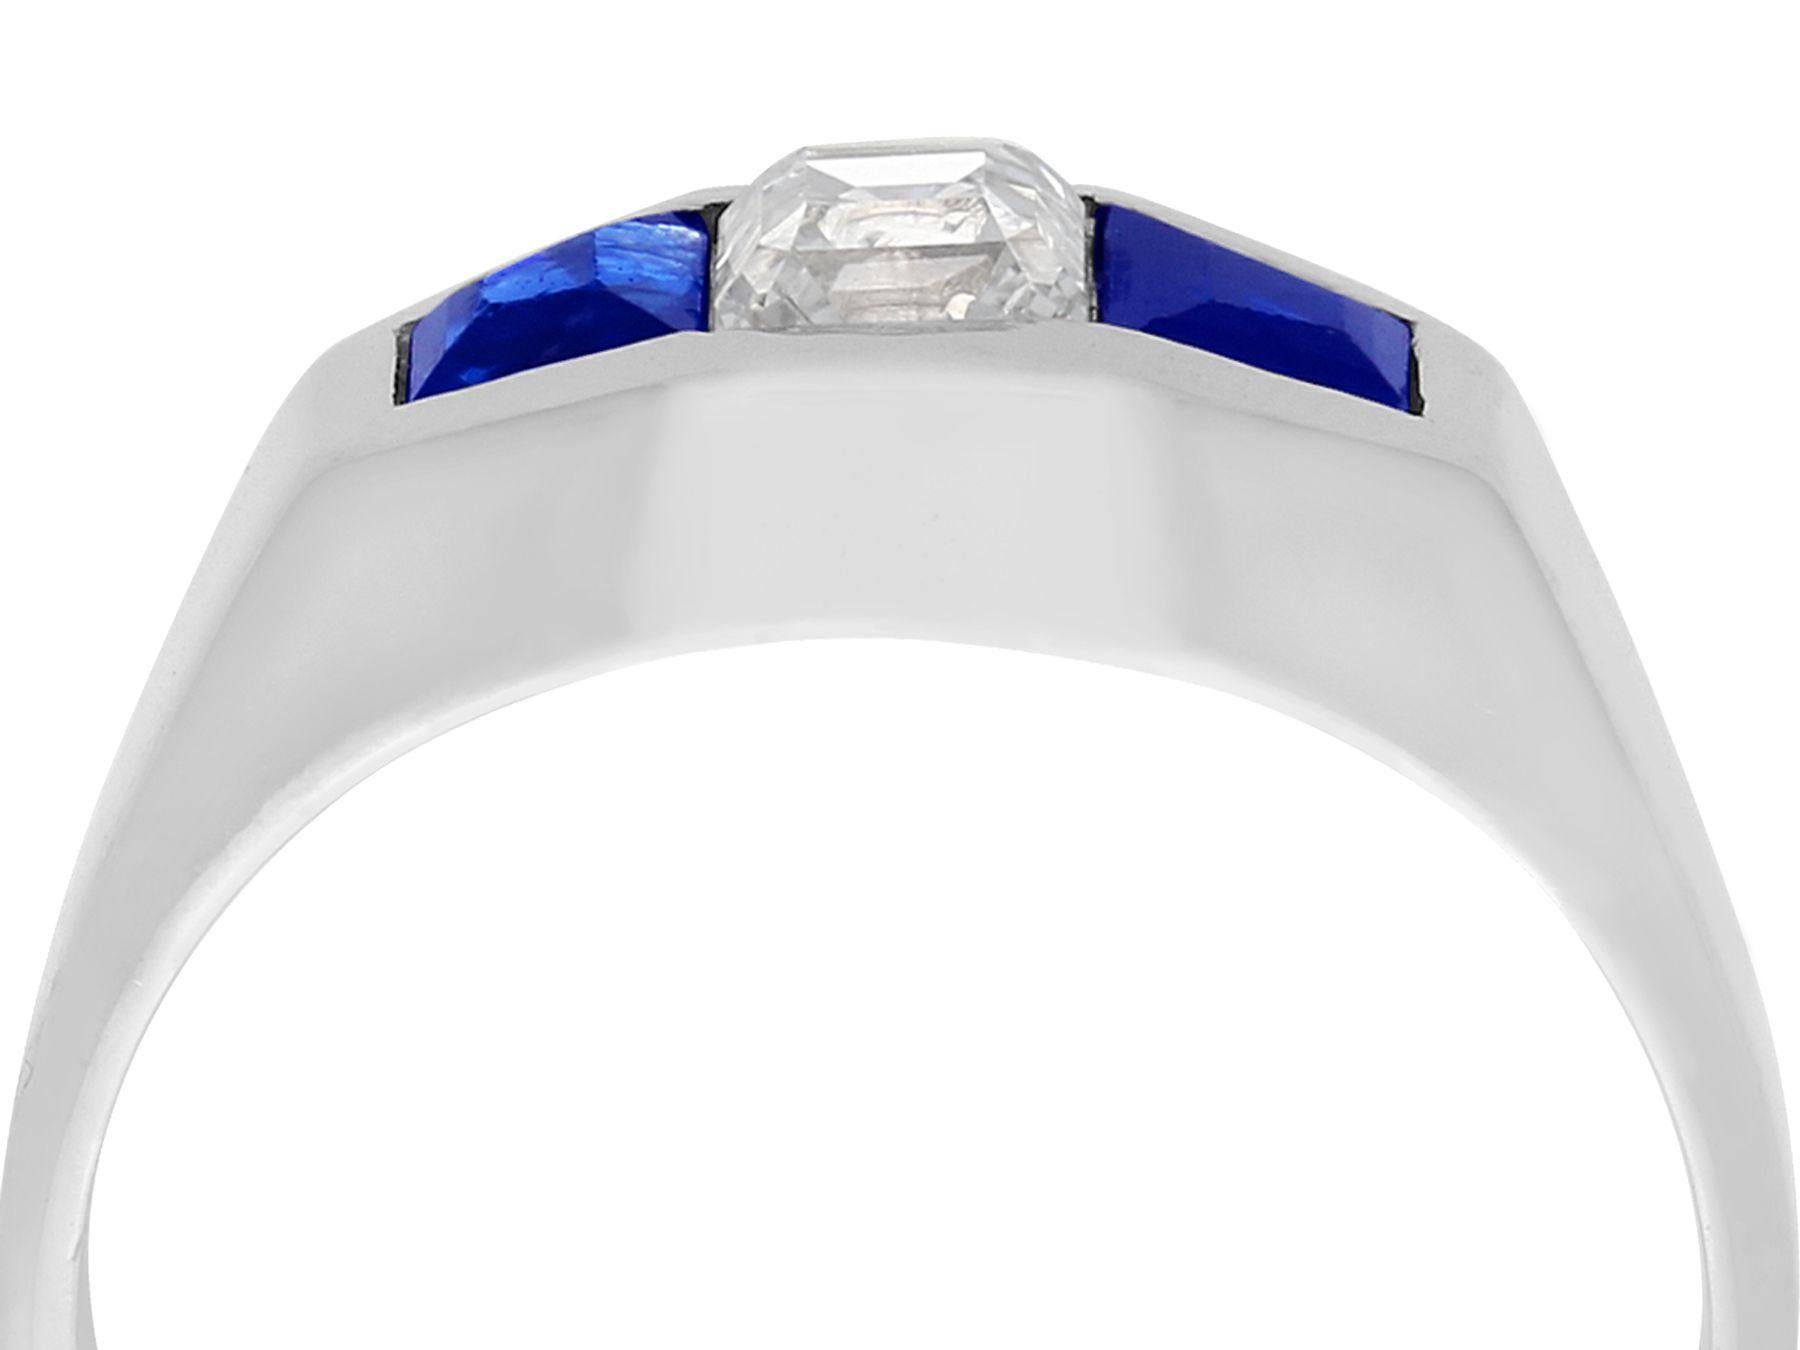 A fine and impressive antique French Art Deco style 0.30 carat diamond and 0.62 carat natural blue sapphire, 18 karat white gold three stone dress ring; part of our antique jewelry and estate jewelry collections

This fine and impressive antique